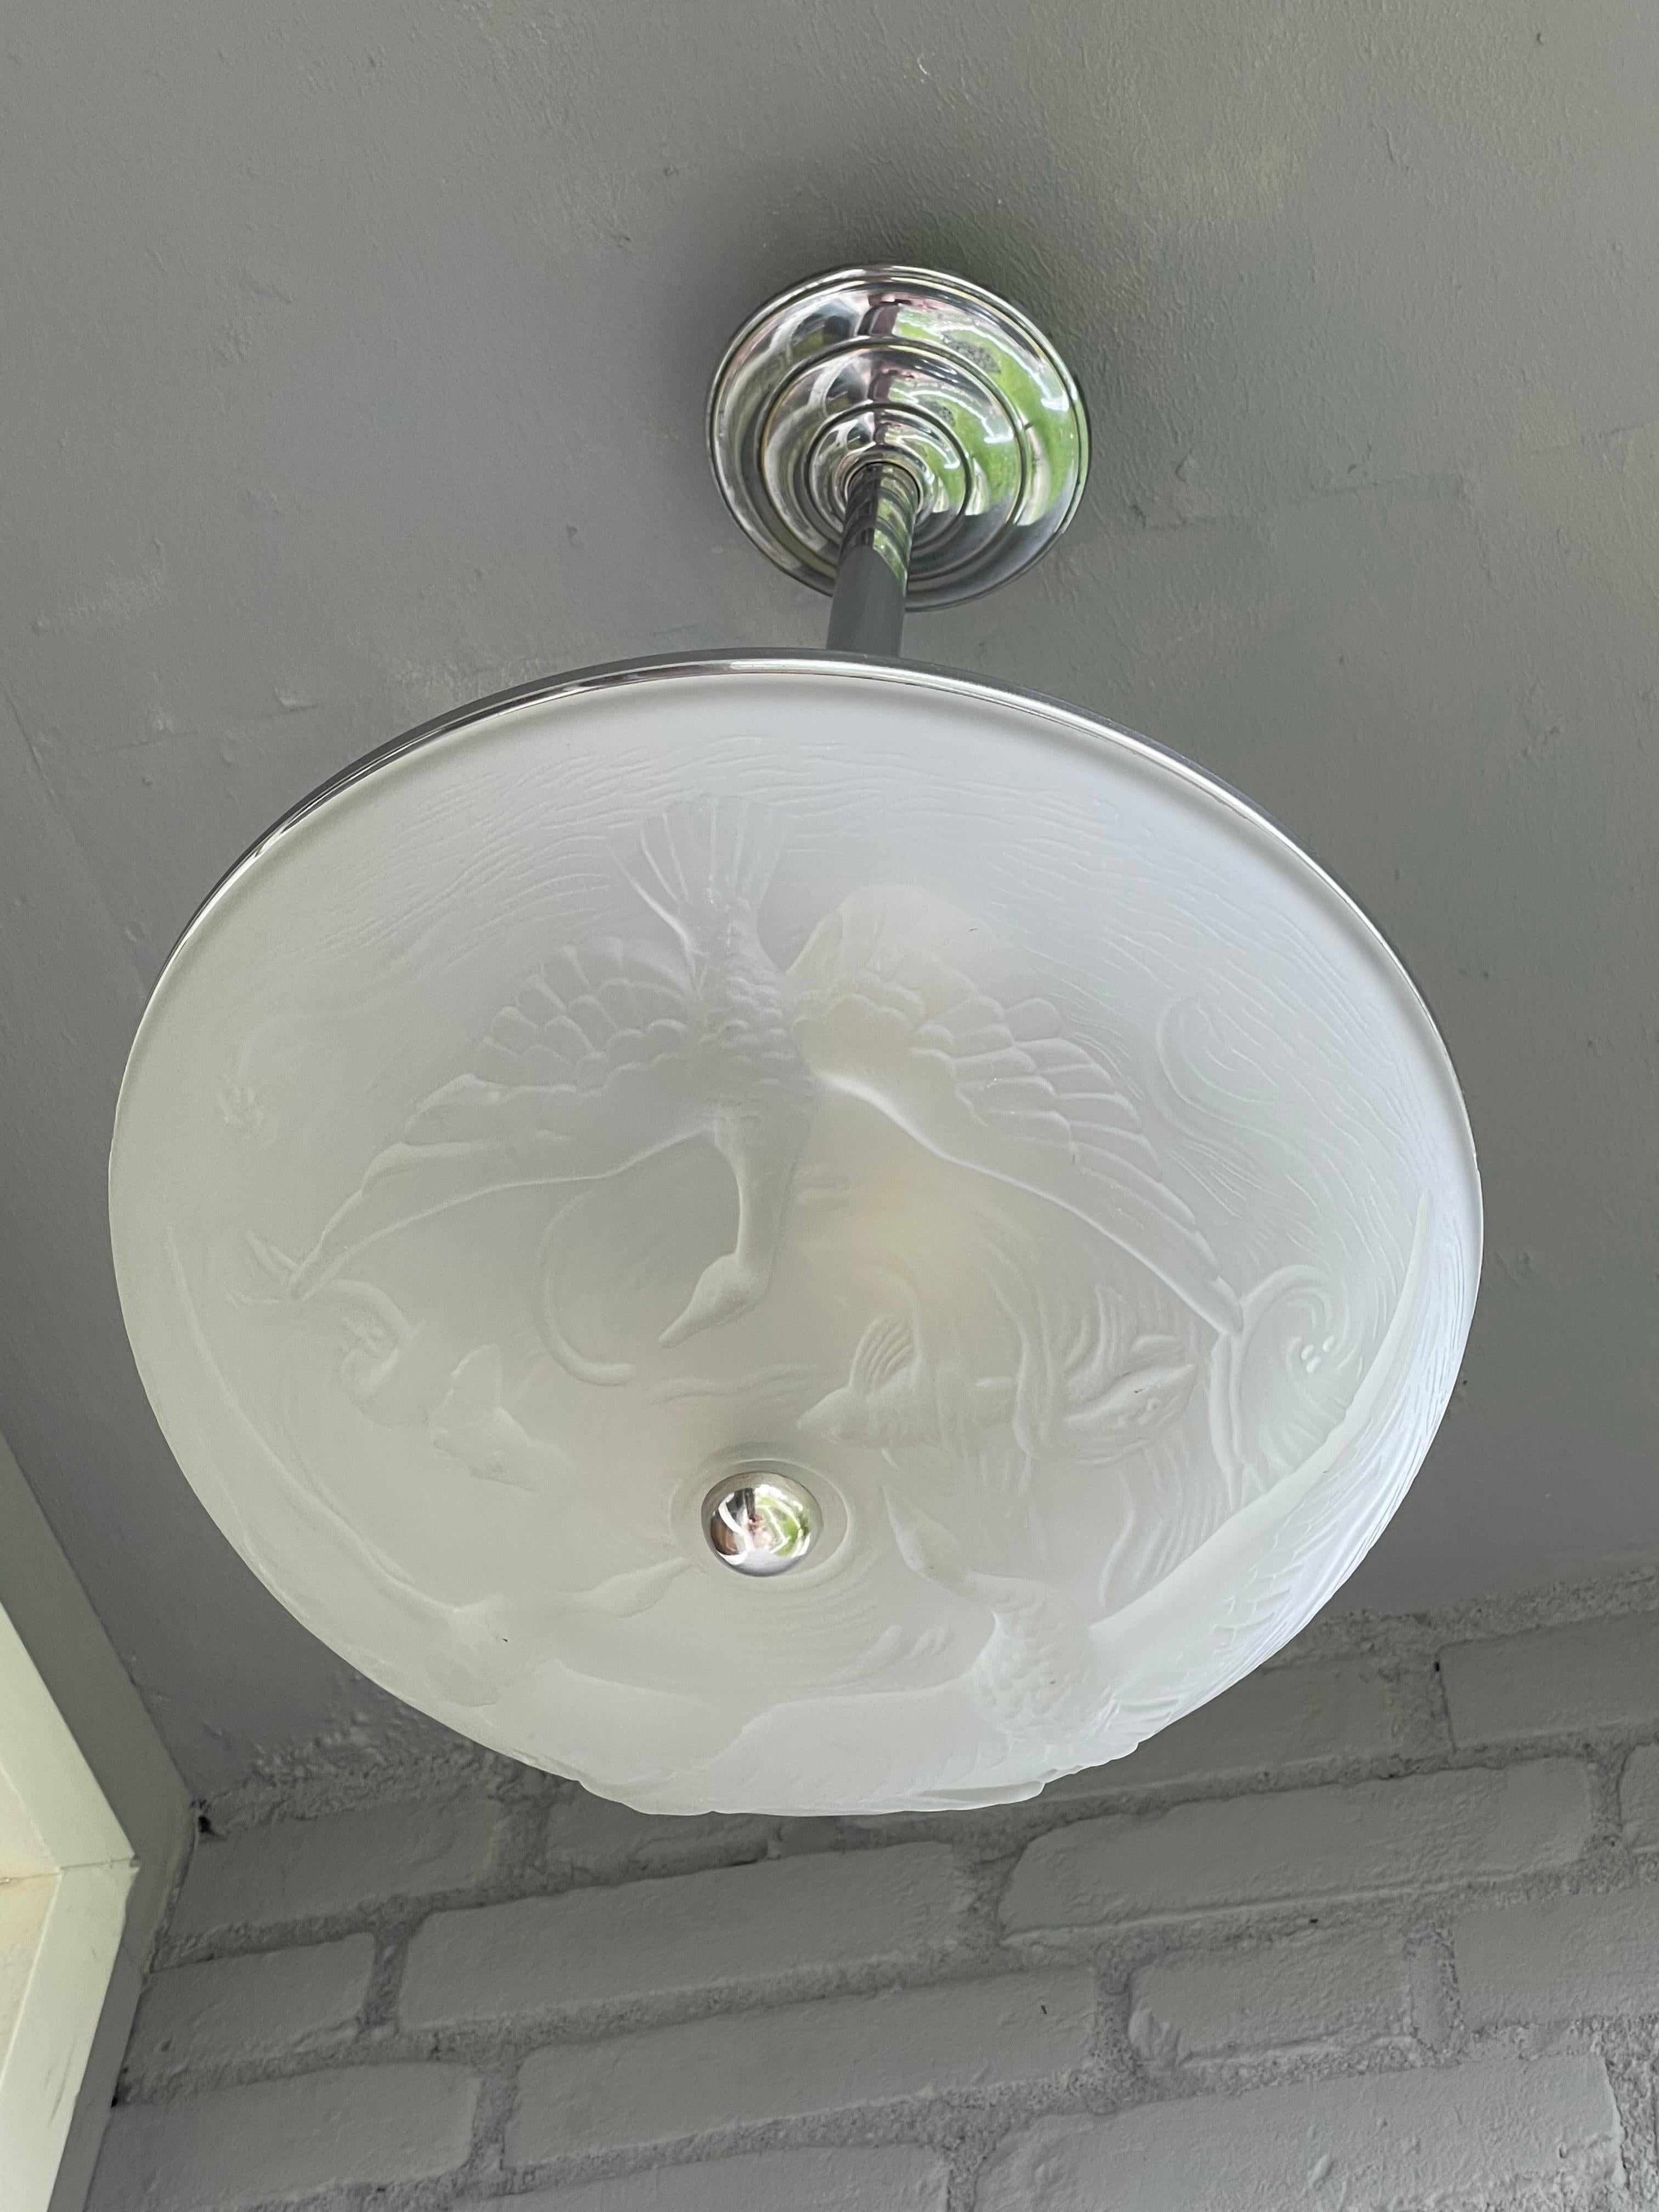 Very stylish and rare, 1920s Art Deco chrome and art glass pendant light.

This early 20th century, French Art Deco light fixture is another great example of the stylish and meaningful pieces that the French were creating in the 1920s. The three